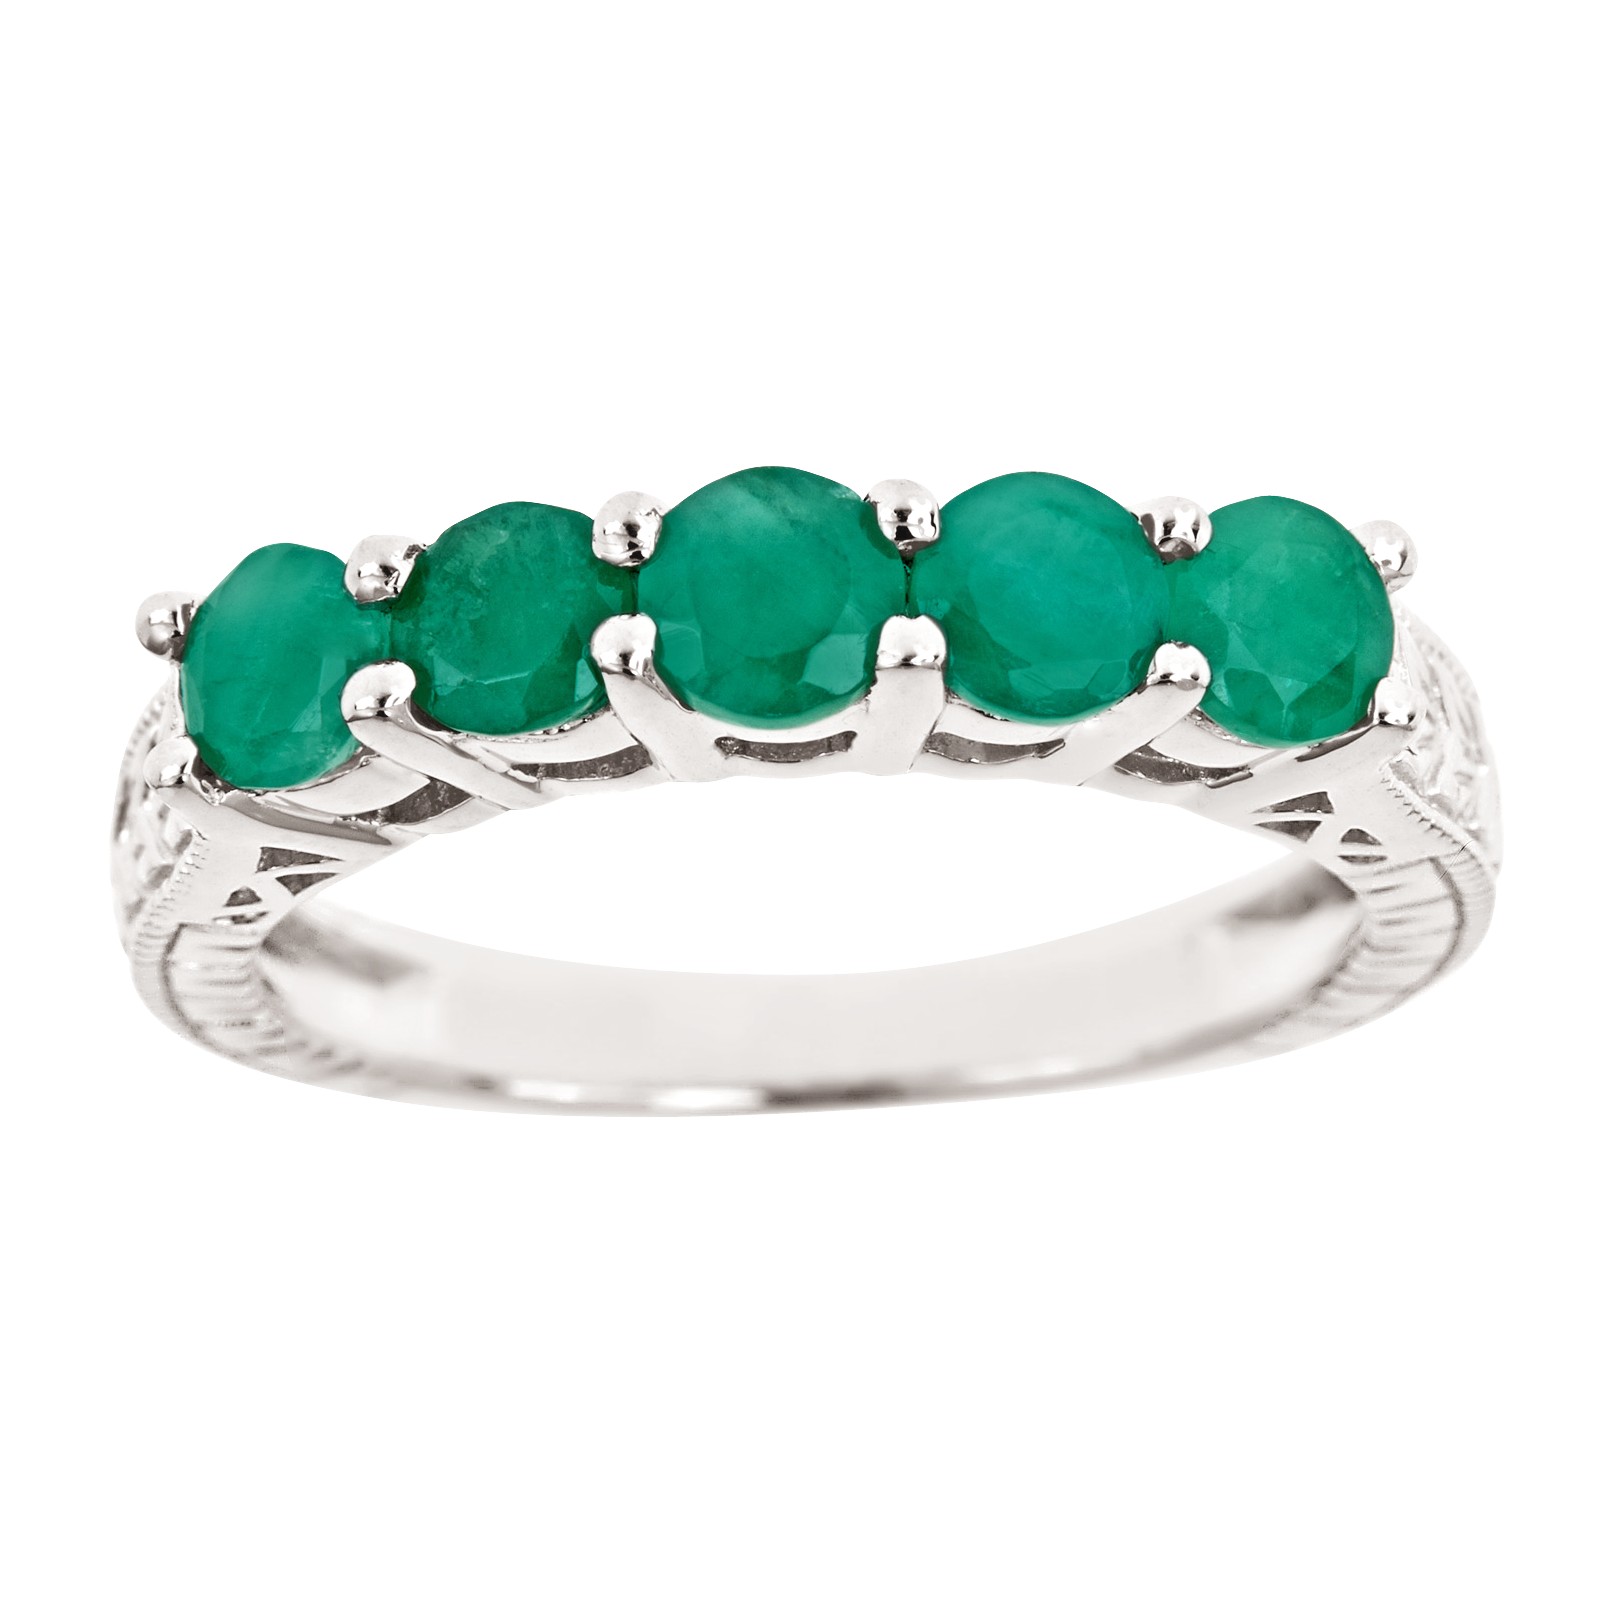 Ladies Sterling Silver 5 Stone Round Cut Emerald Ring